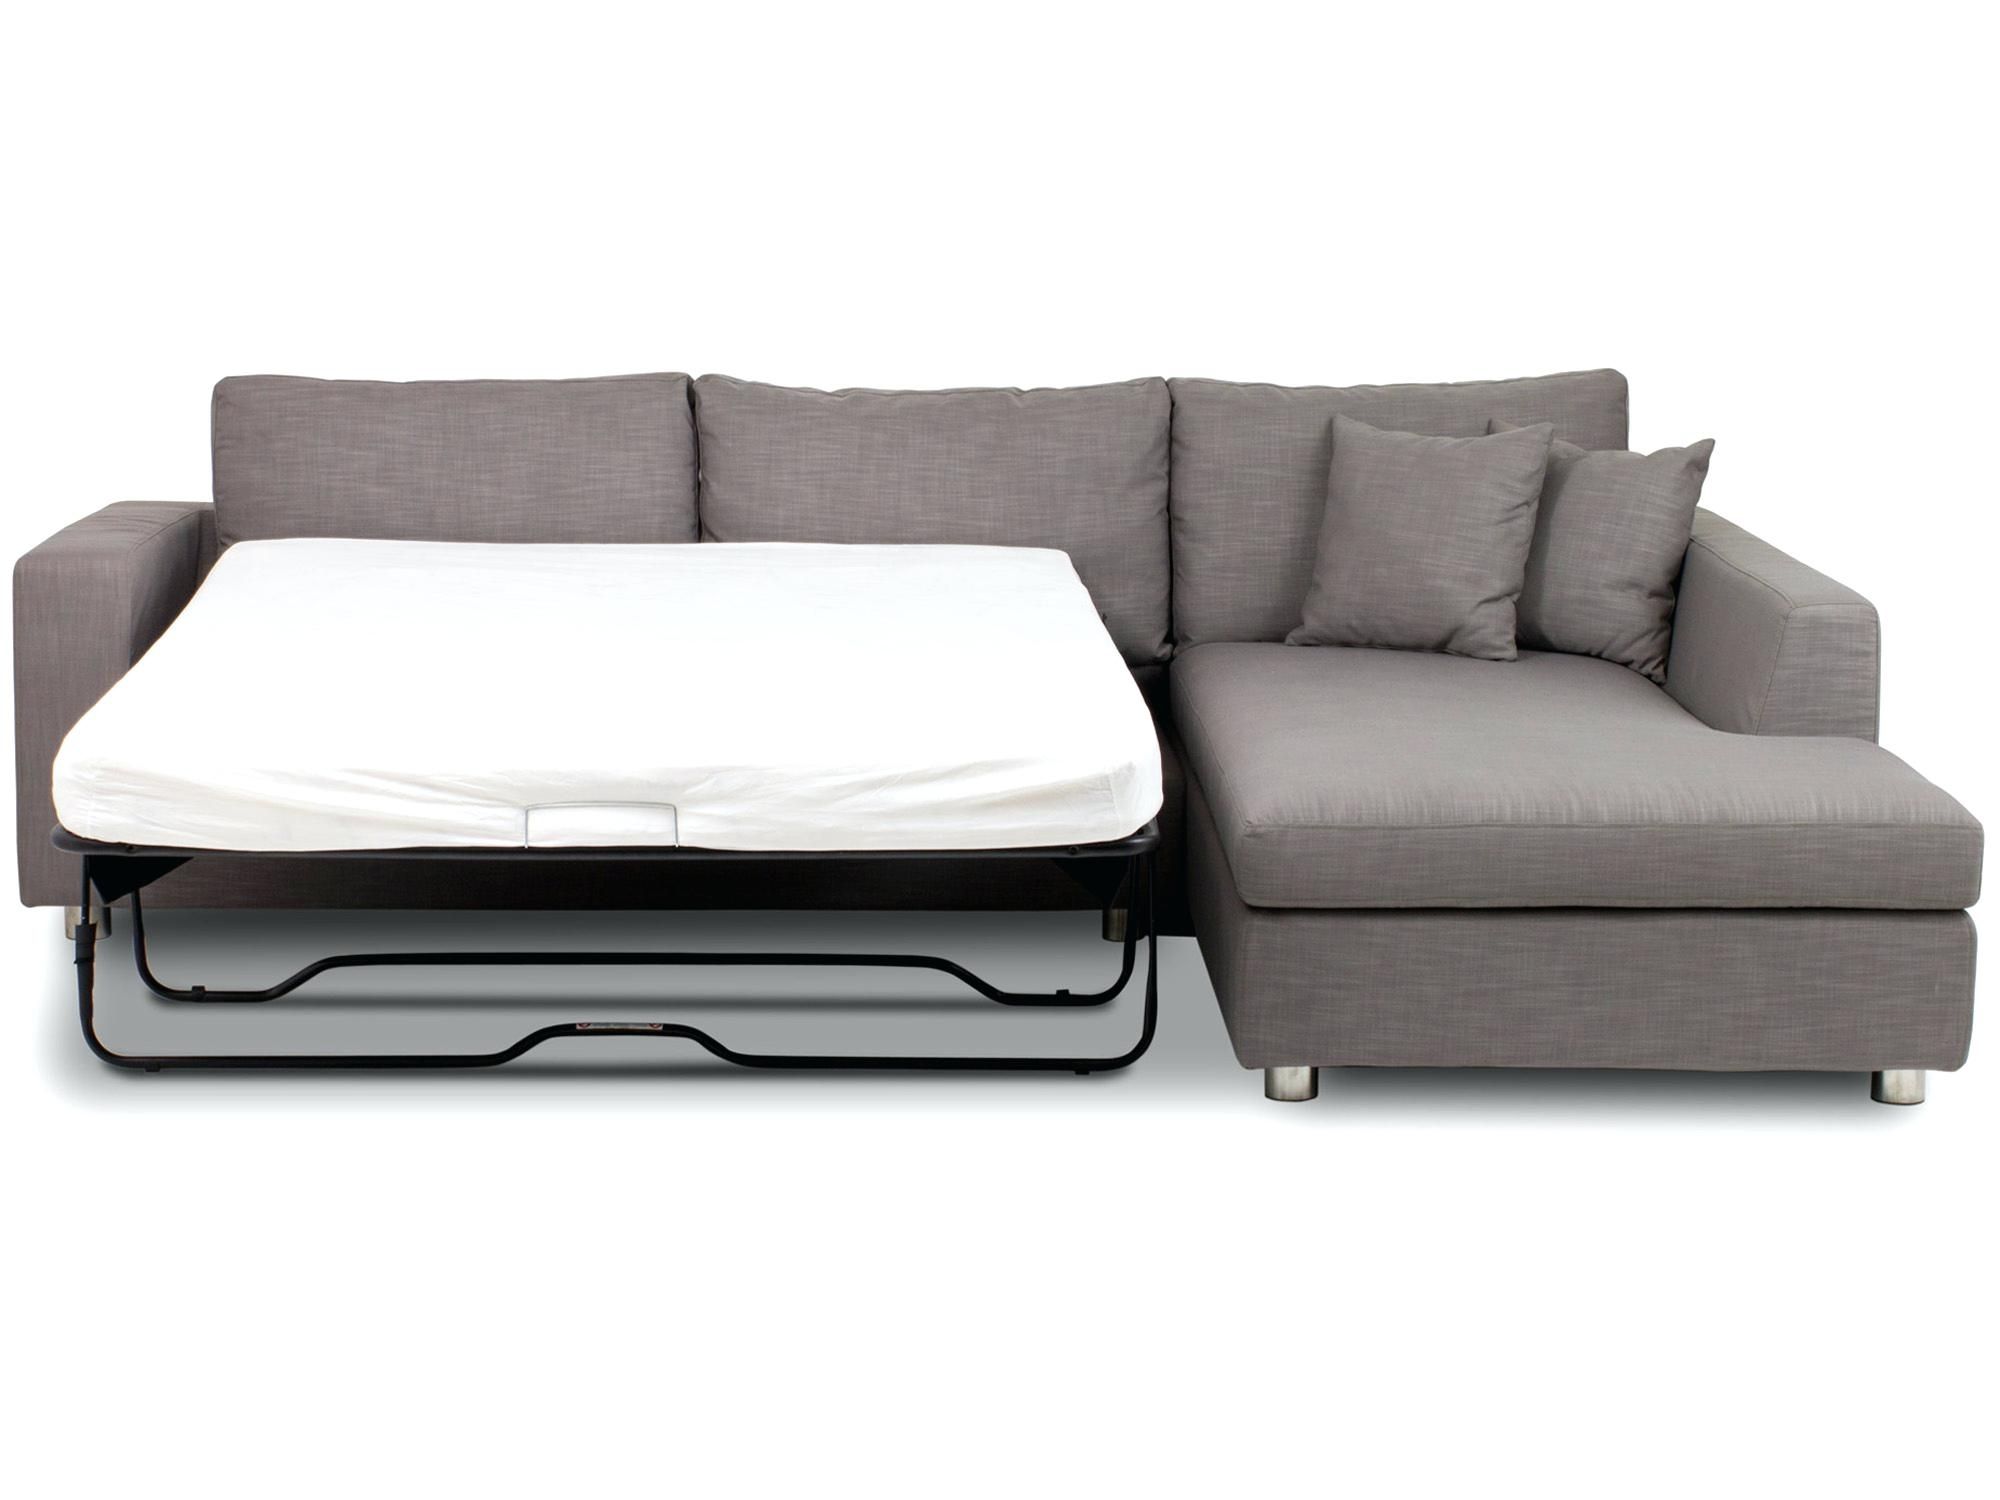 sofa bed with chaise lounge